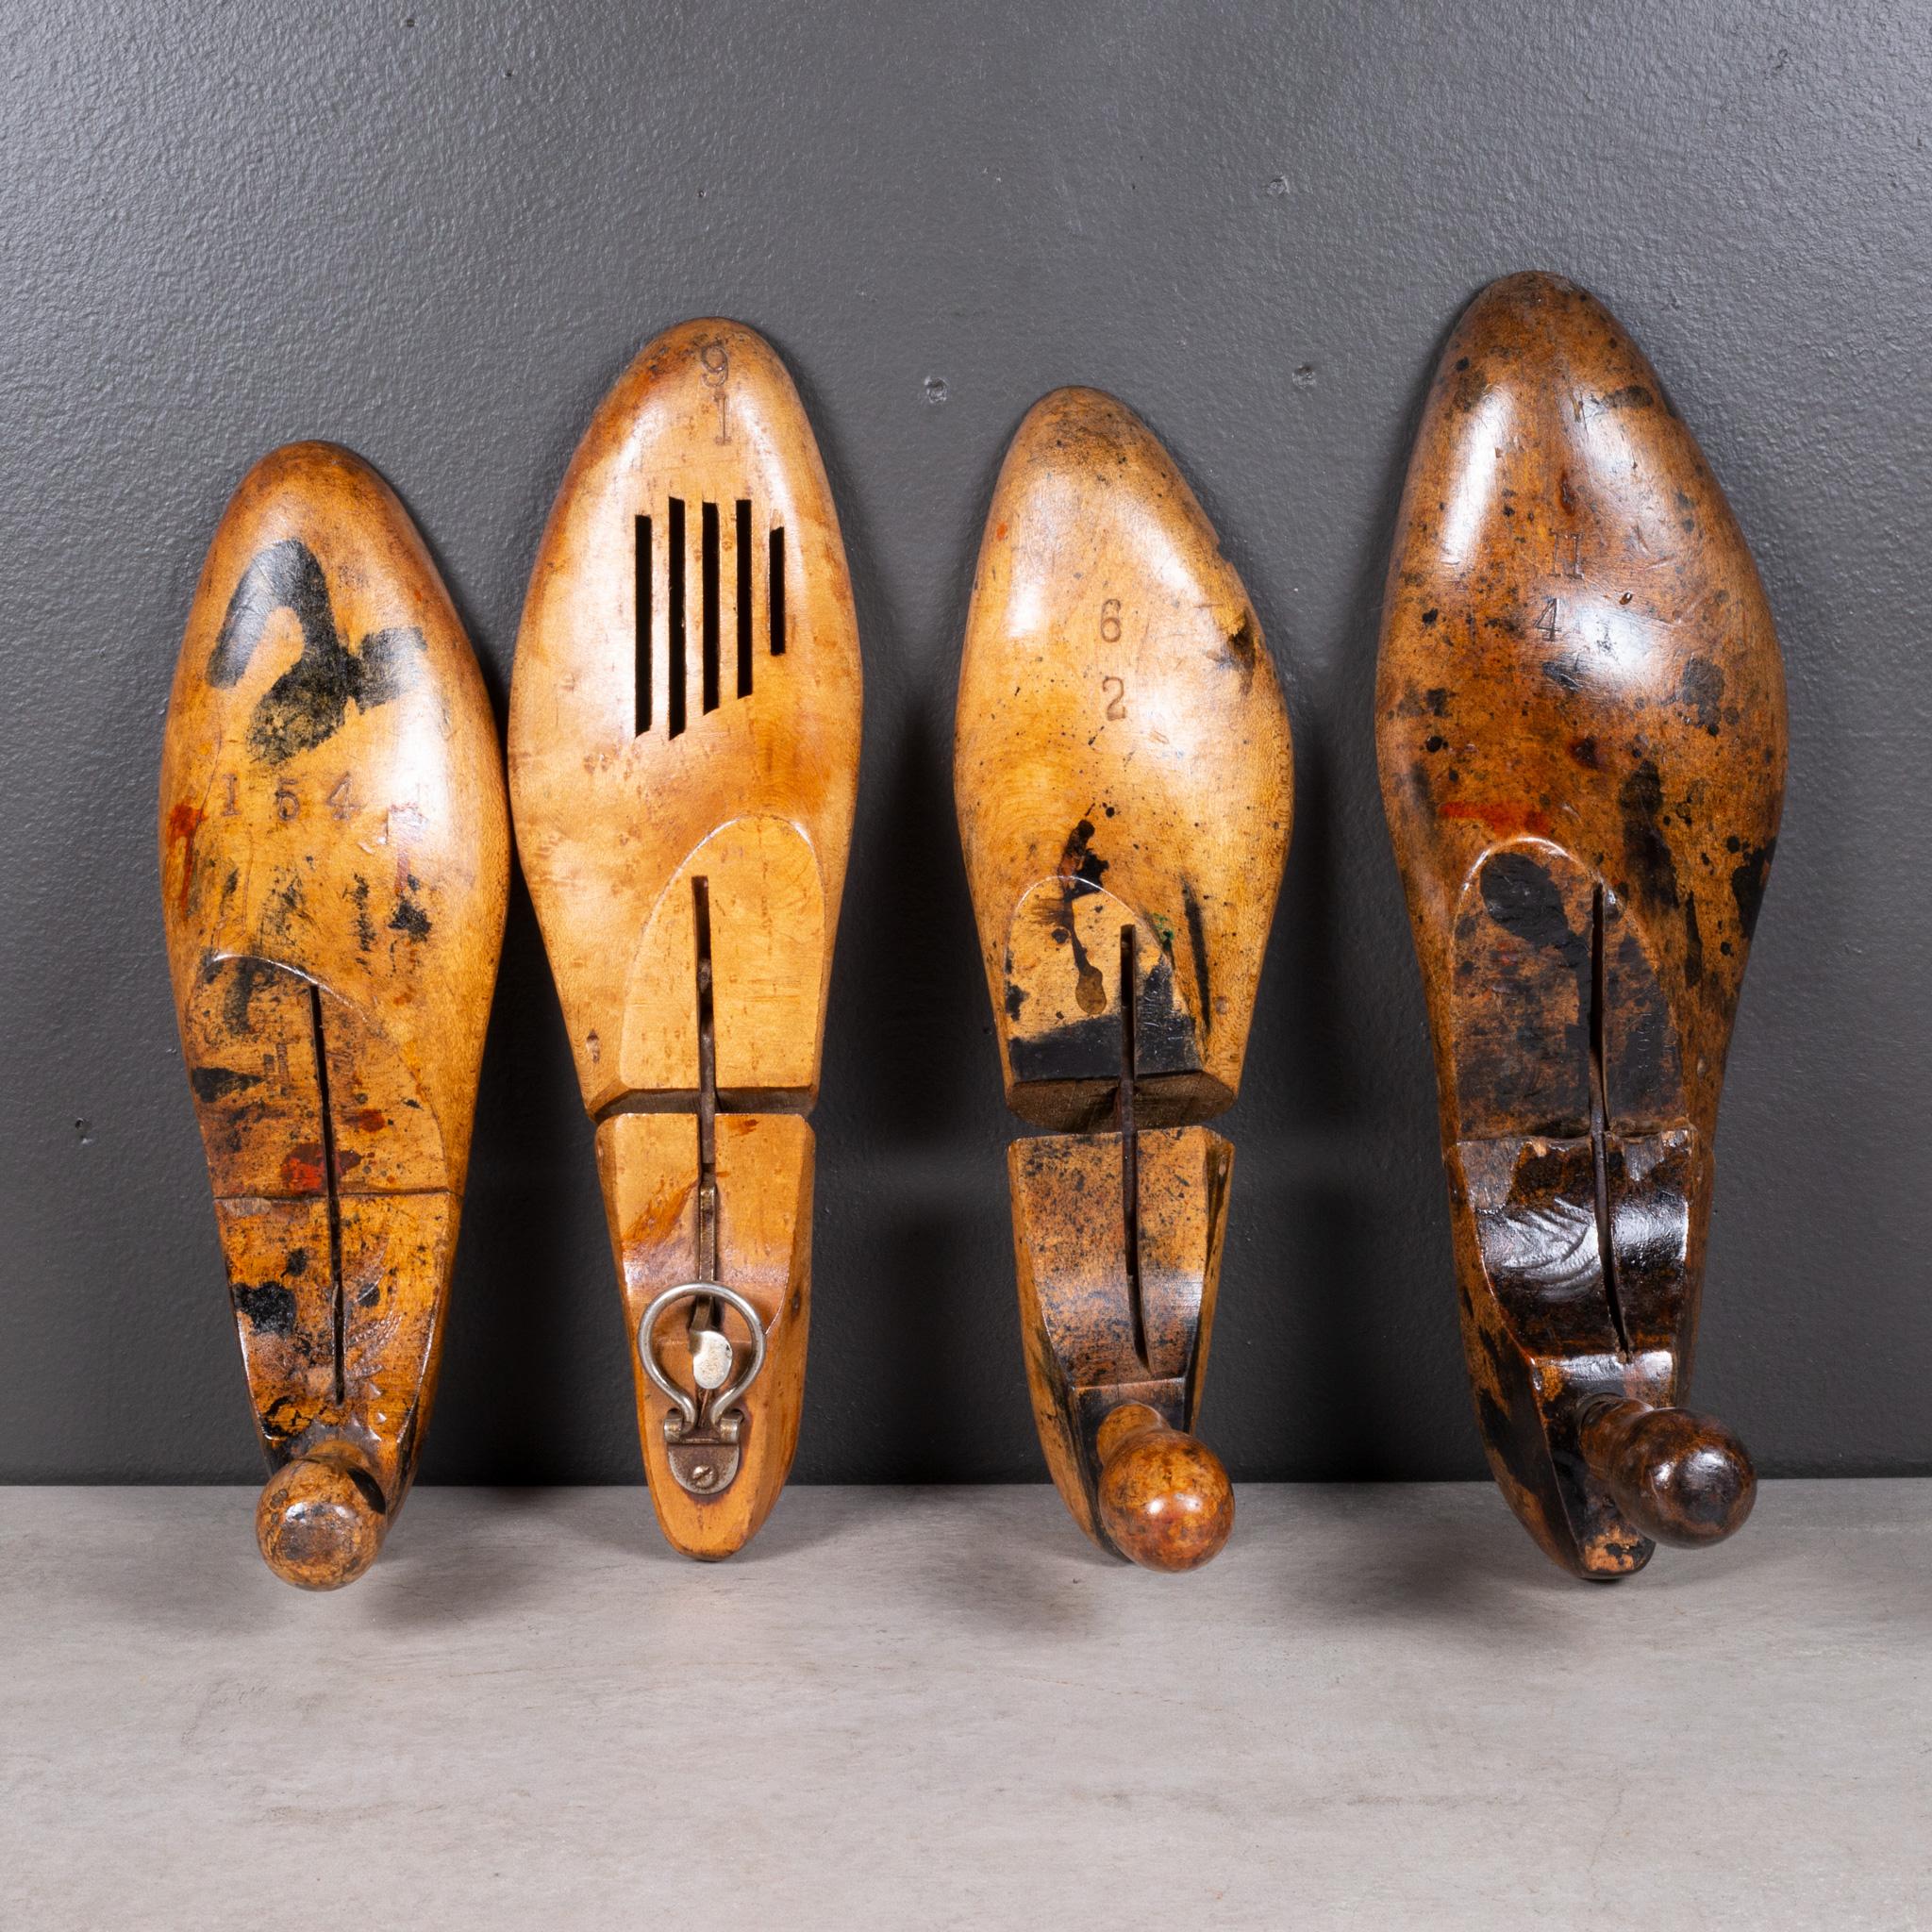 20th Century Antique Wooden Shoe Forms c.1920-Multiple Sets Available (FREE SHIPPING) For Sale